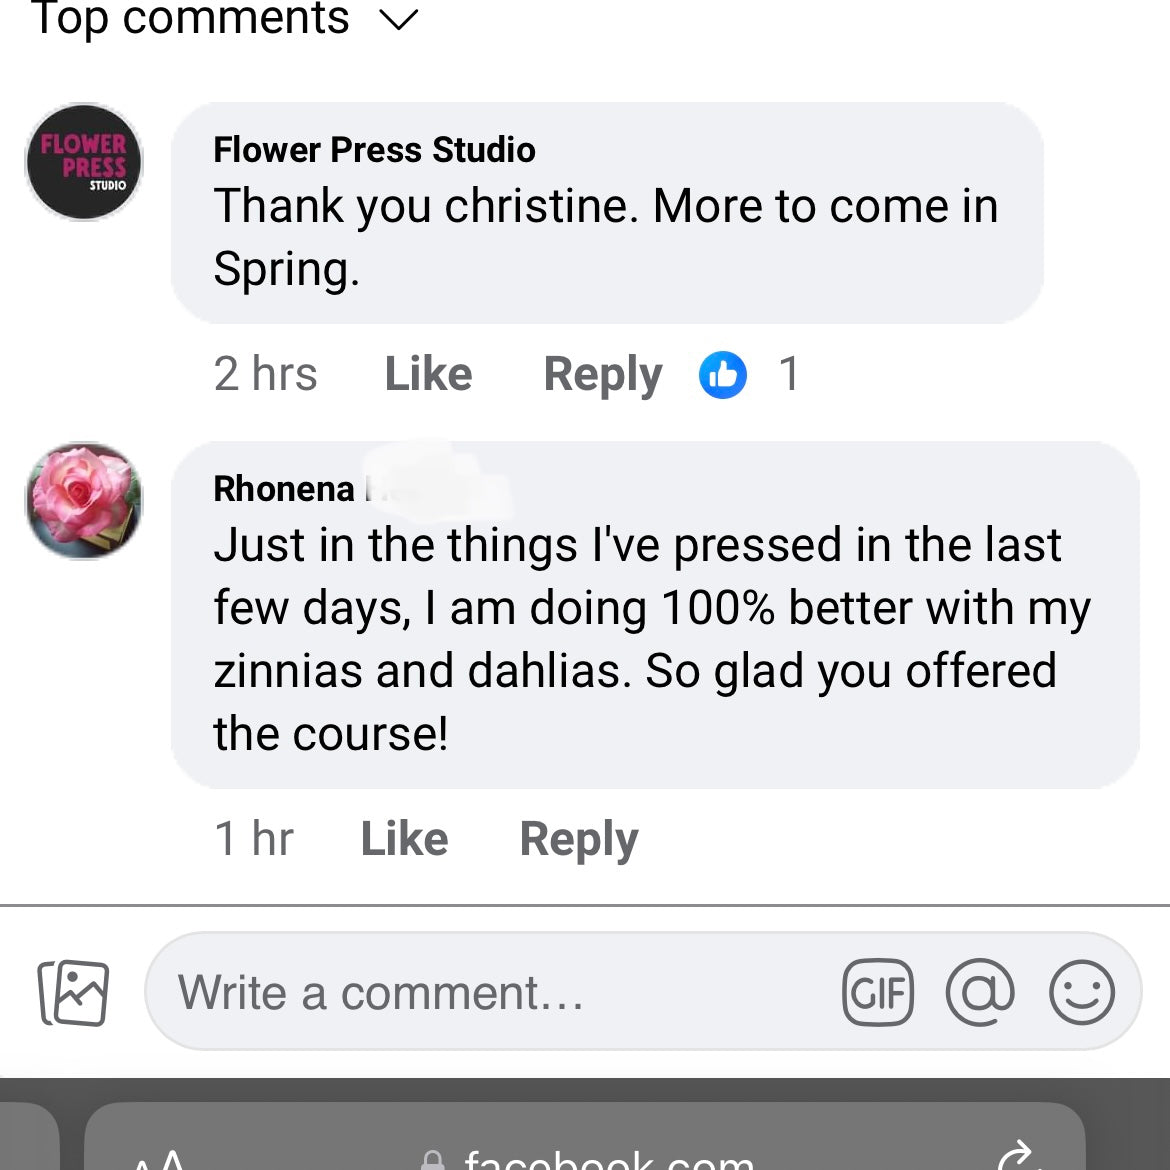 A positive review about a flower pressing course.